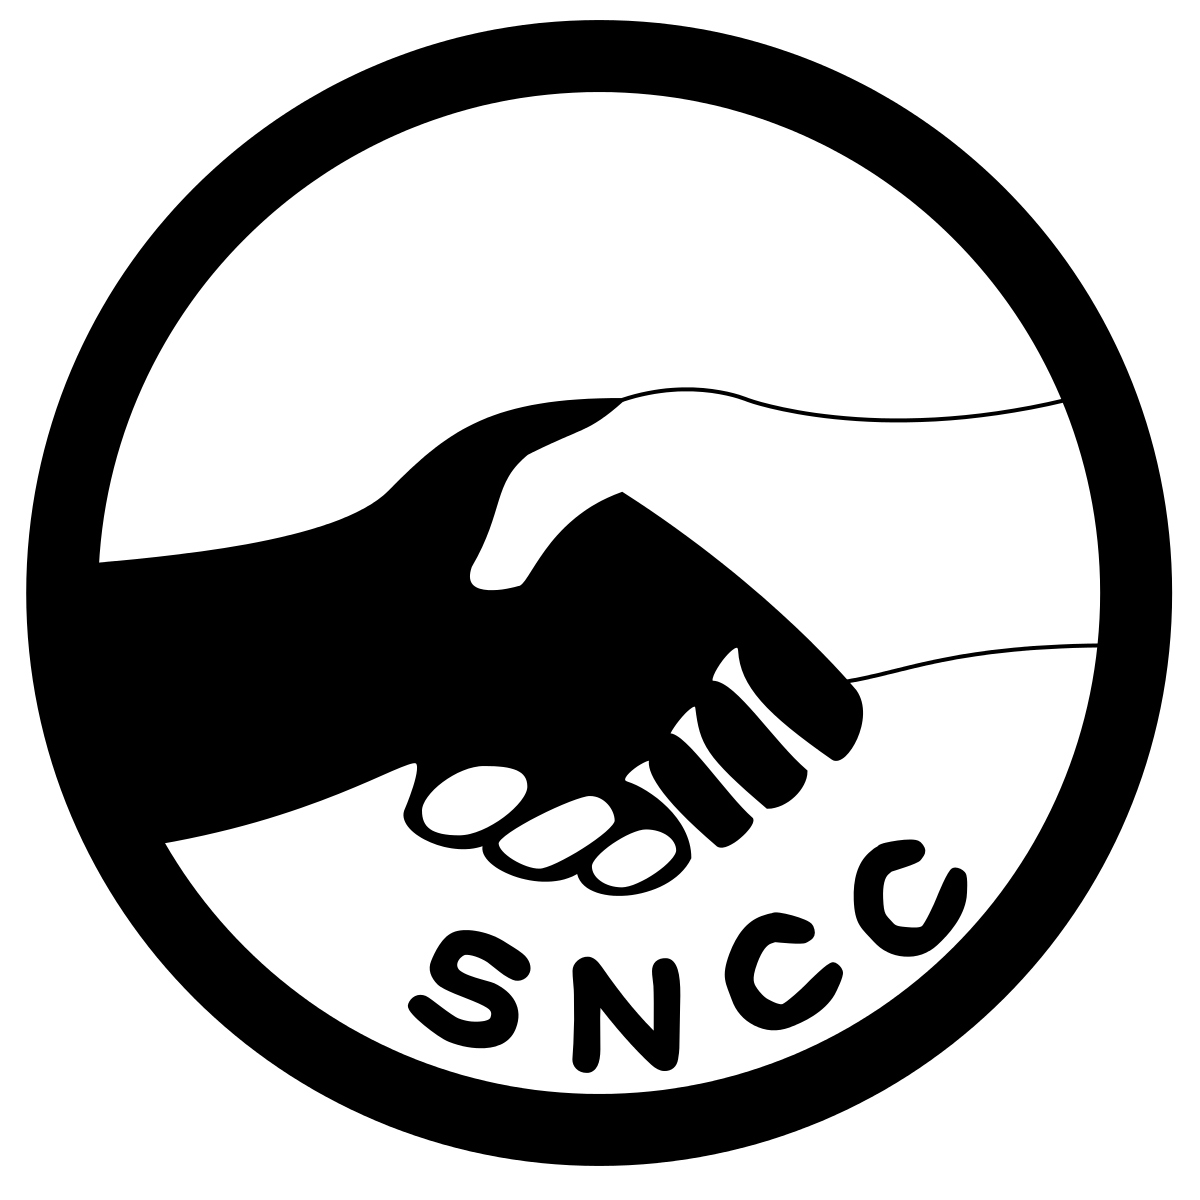 Student nonviolent coordinating committee. Poverty clipart poverty symbol